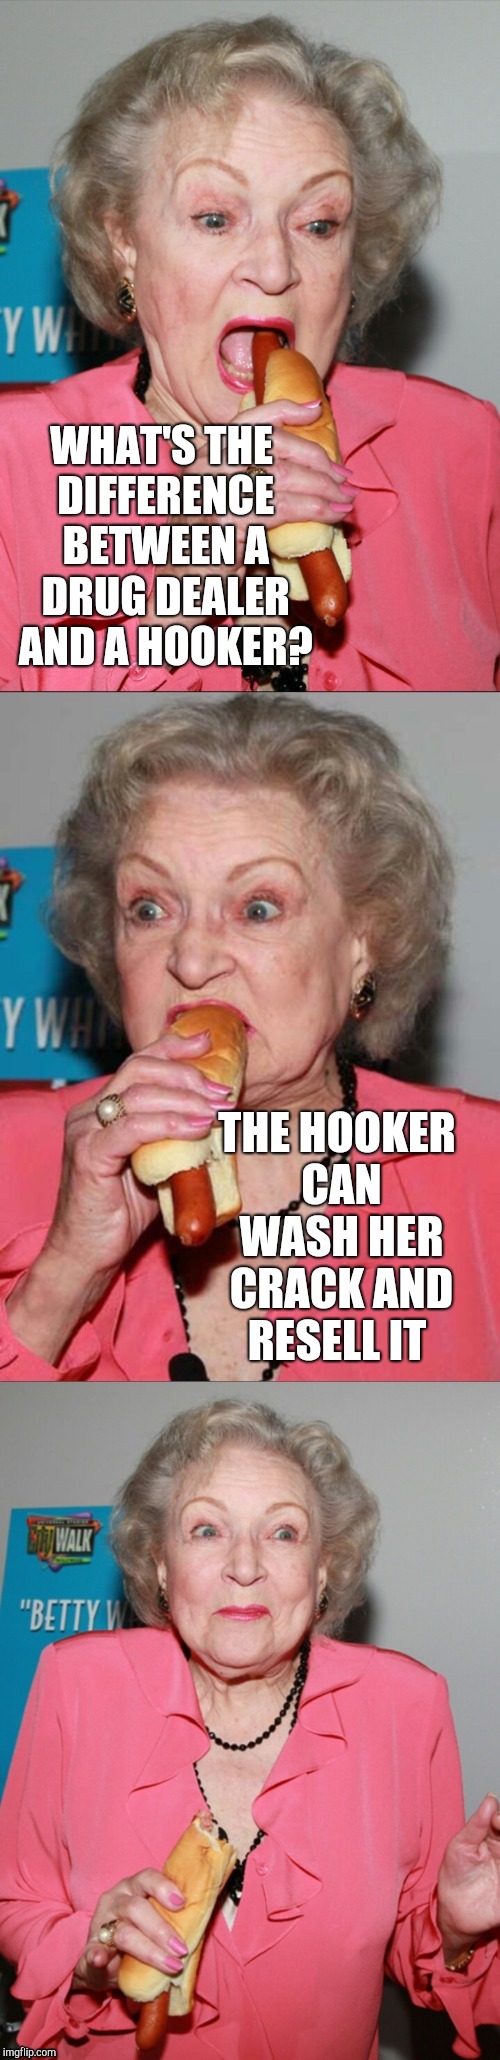 Betty White joke template | WHAT'S THE DIFFERENCE BETWEEN A DRUG DEALER AND A HOOKER? THE HOOKER CAN WASH HER CRACK AND RESELL IT | image tagged in betty white joke template,betty white,bad puns | made w/ Imgflip meme maker